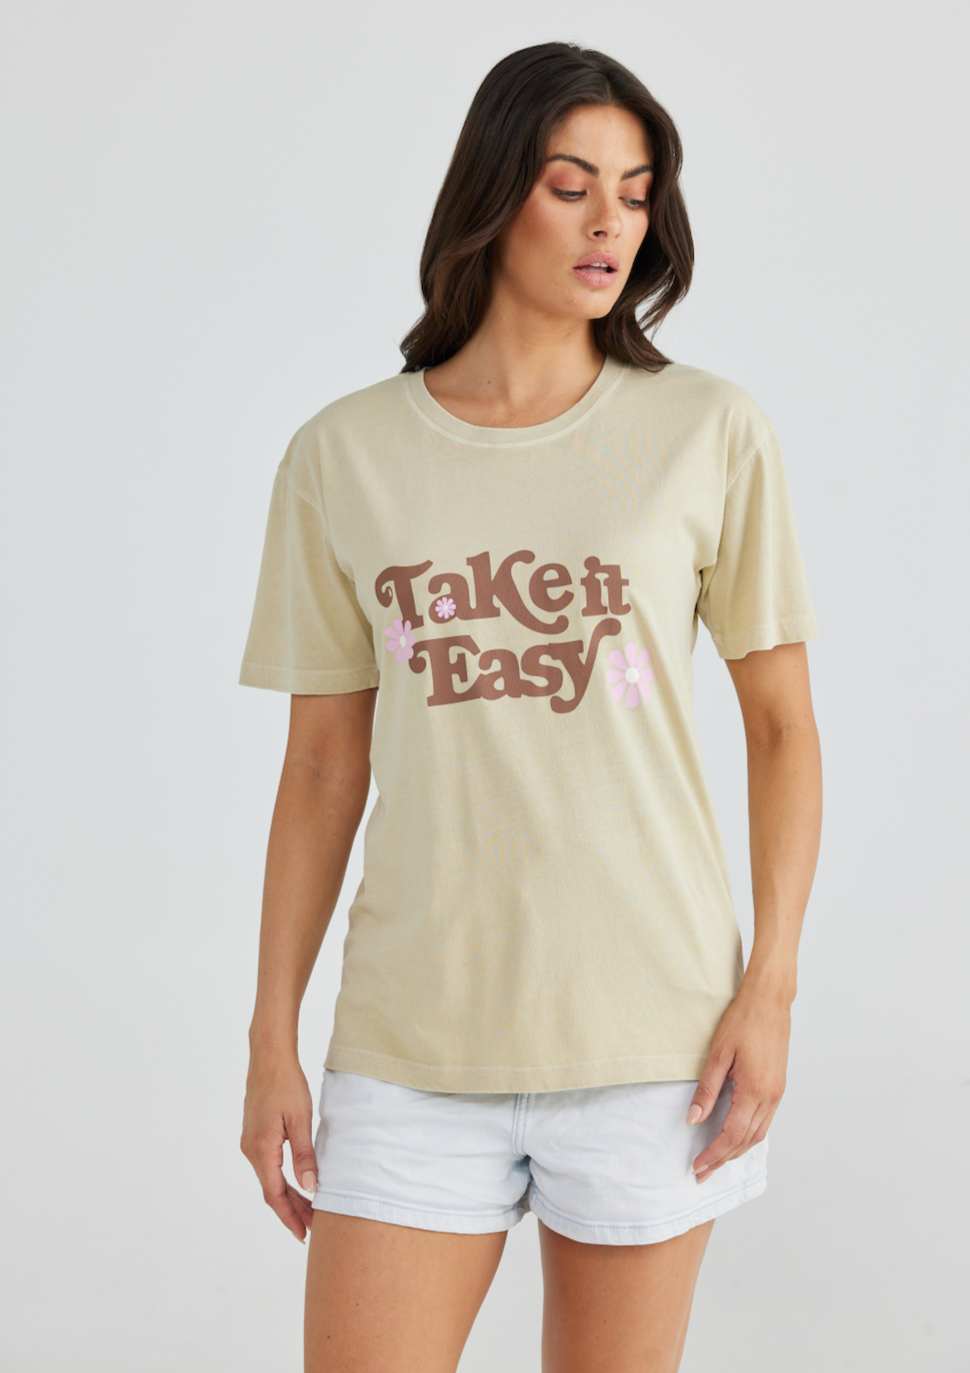 Take it Easy Relaxed Tee - Ecru, by Talisman An essential tee to add to your collection of sustainable staples. Woven from soft organic cotton, this Talisman treasure features beautiful in-house designed artwork. With a wide neck binding and elongated sleeves that tap into its oversized fit, this versatile piece is great for layering, tucking or tying, and looks just as gorgeous worn loose.